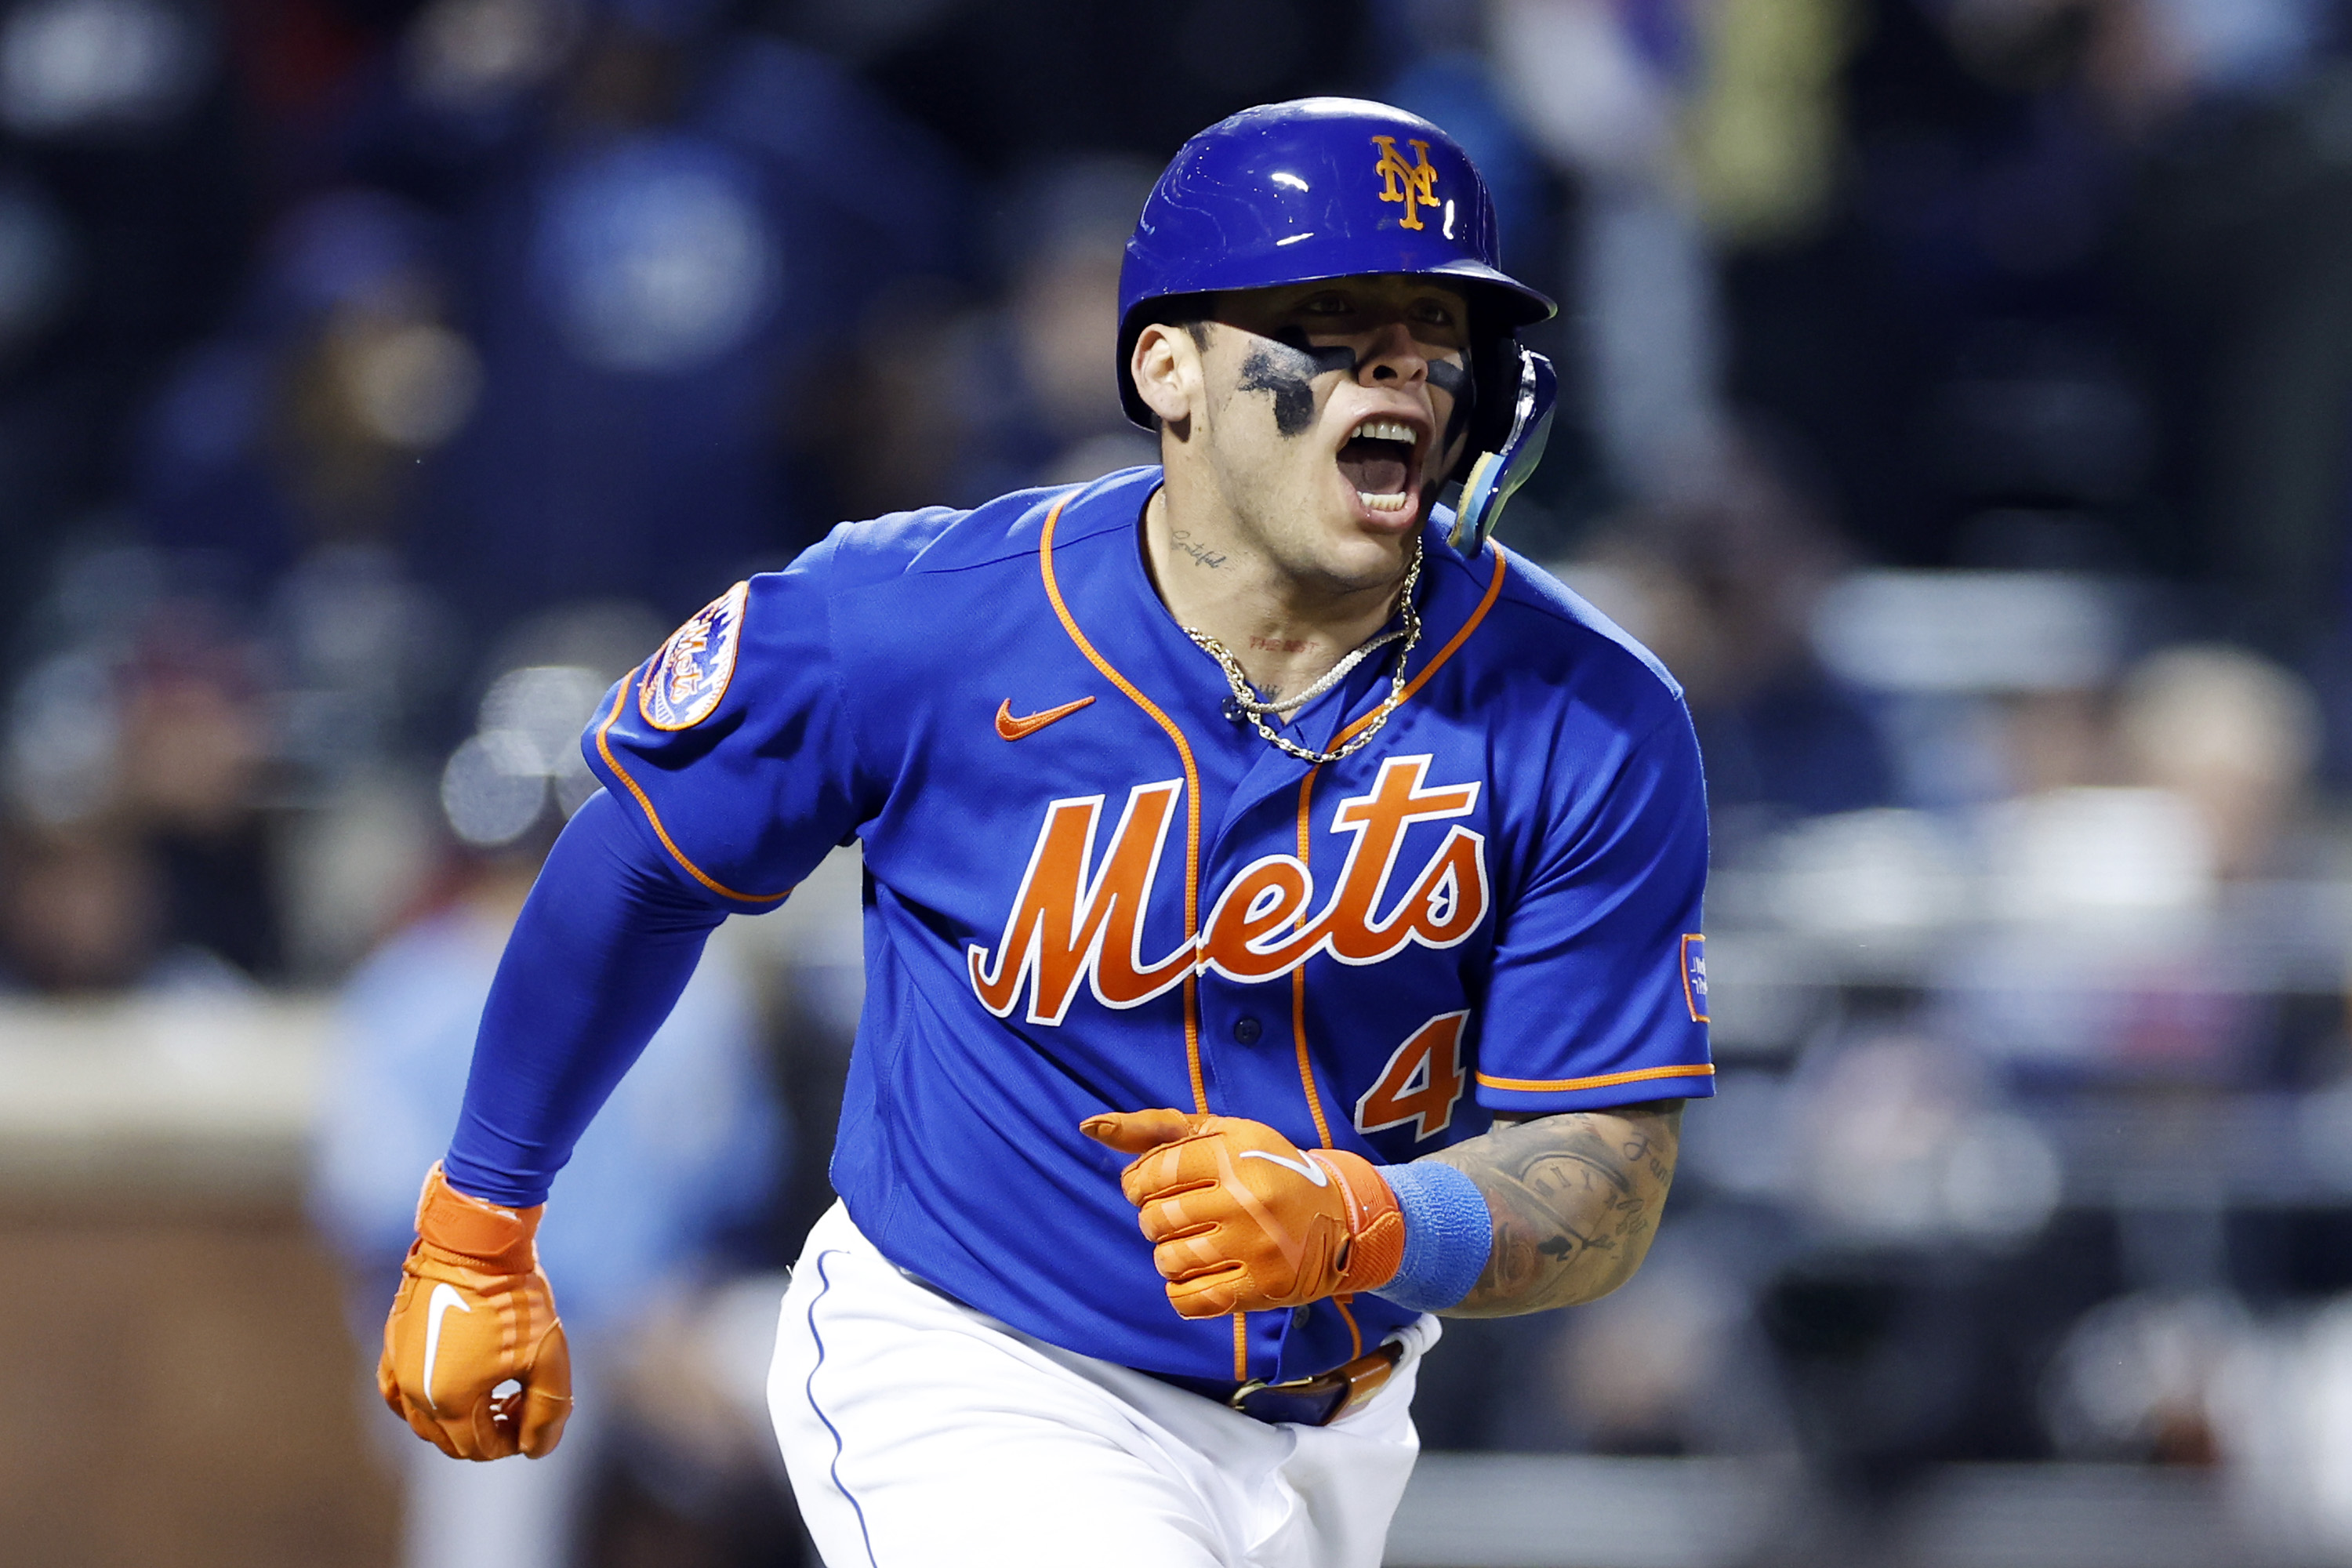 Francisco Alvarez of the New York Mets reacts after hitting a game-tying three-run home run during the ninth inning against the Tampa Bay Rays at Citi Field on May 17, 2023 in the Flushing neighborhood of the Queens borough of New York City.